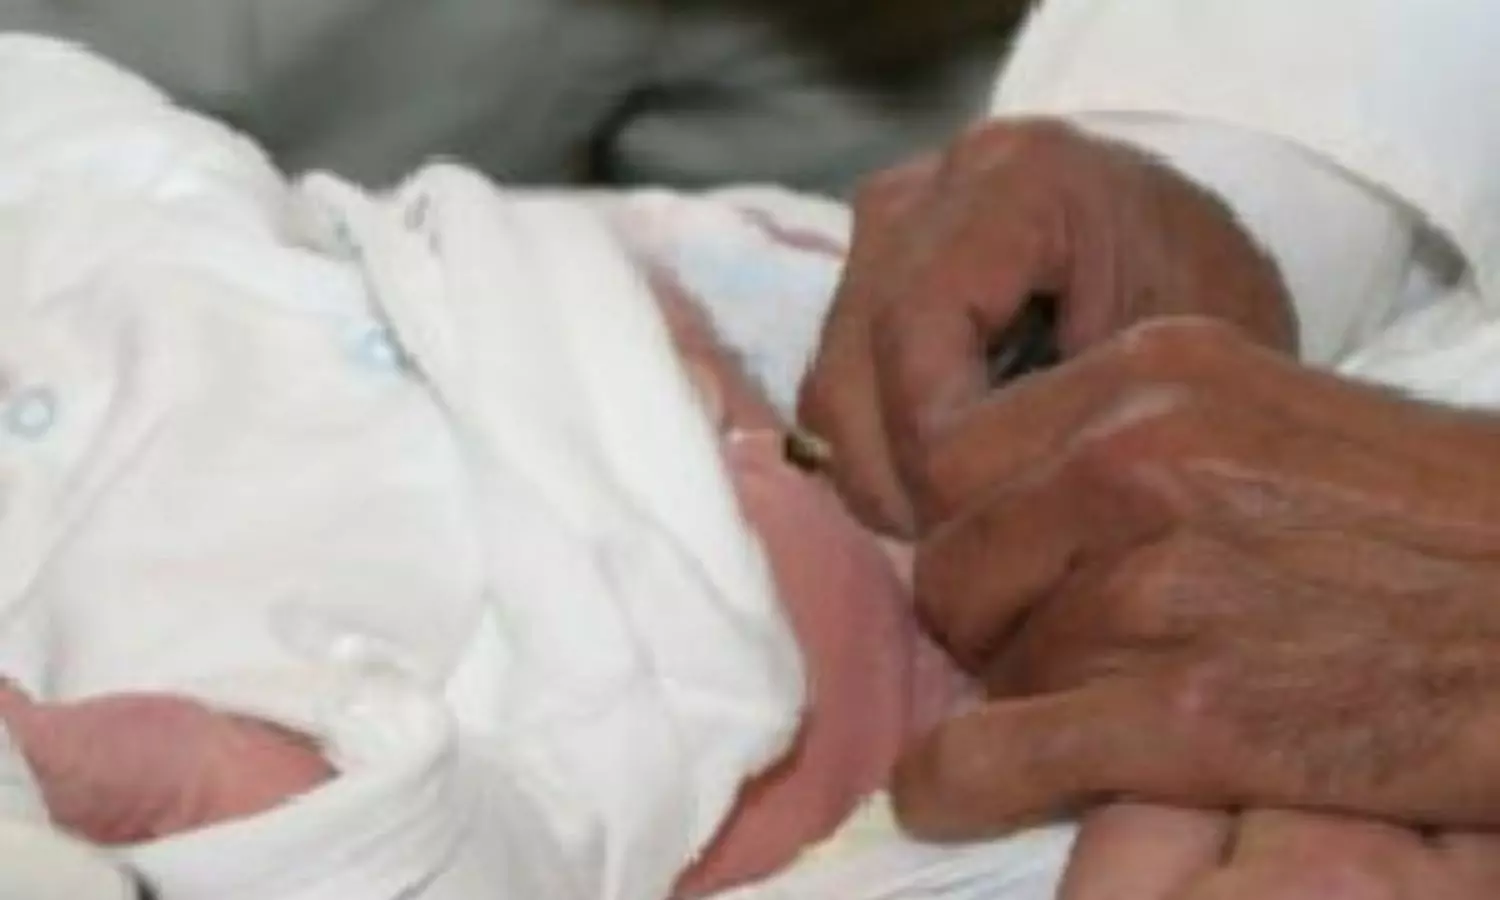 Serious complications, death after neonatal circumcision higher  than believed, study finds